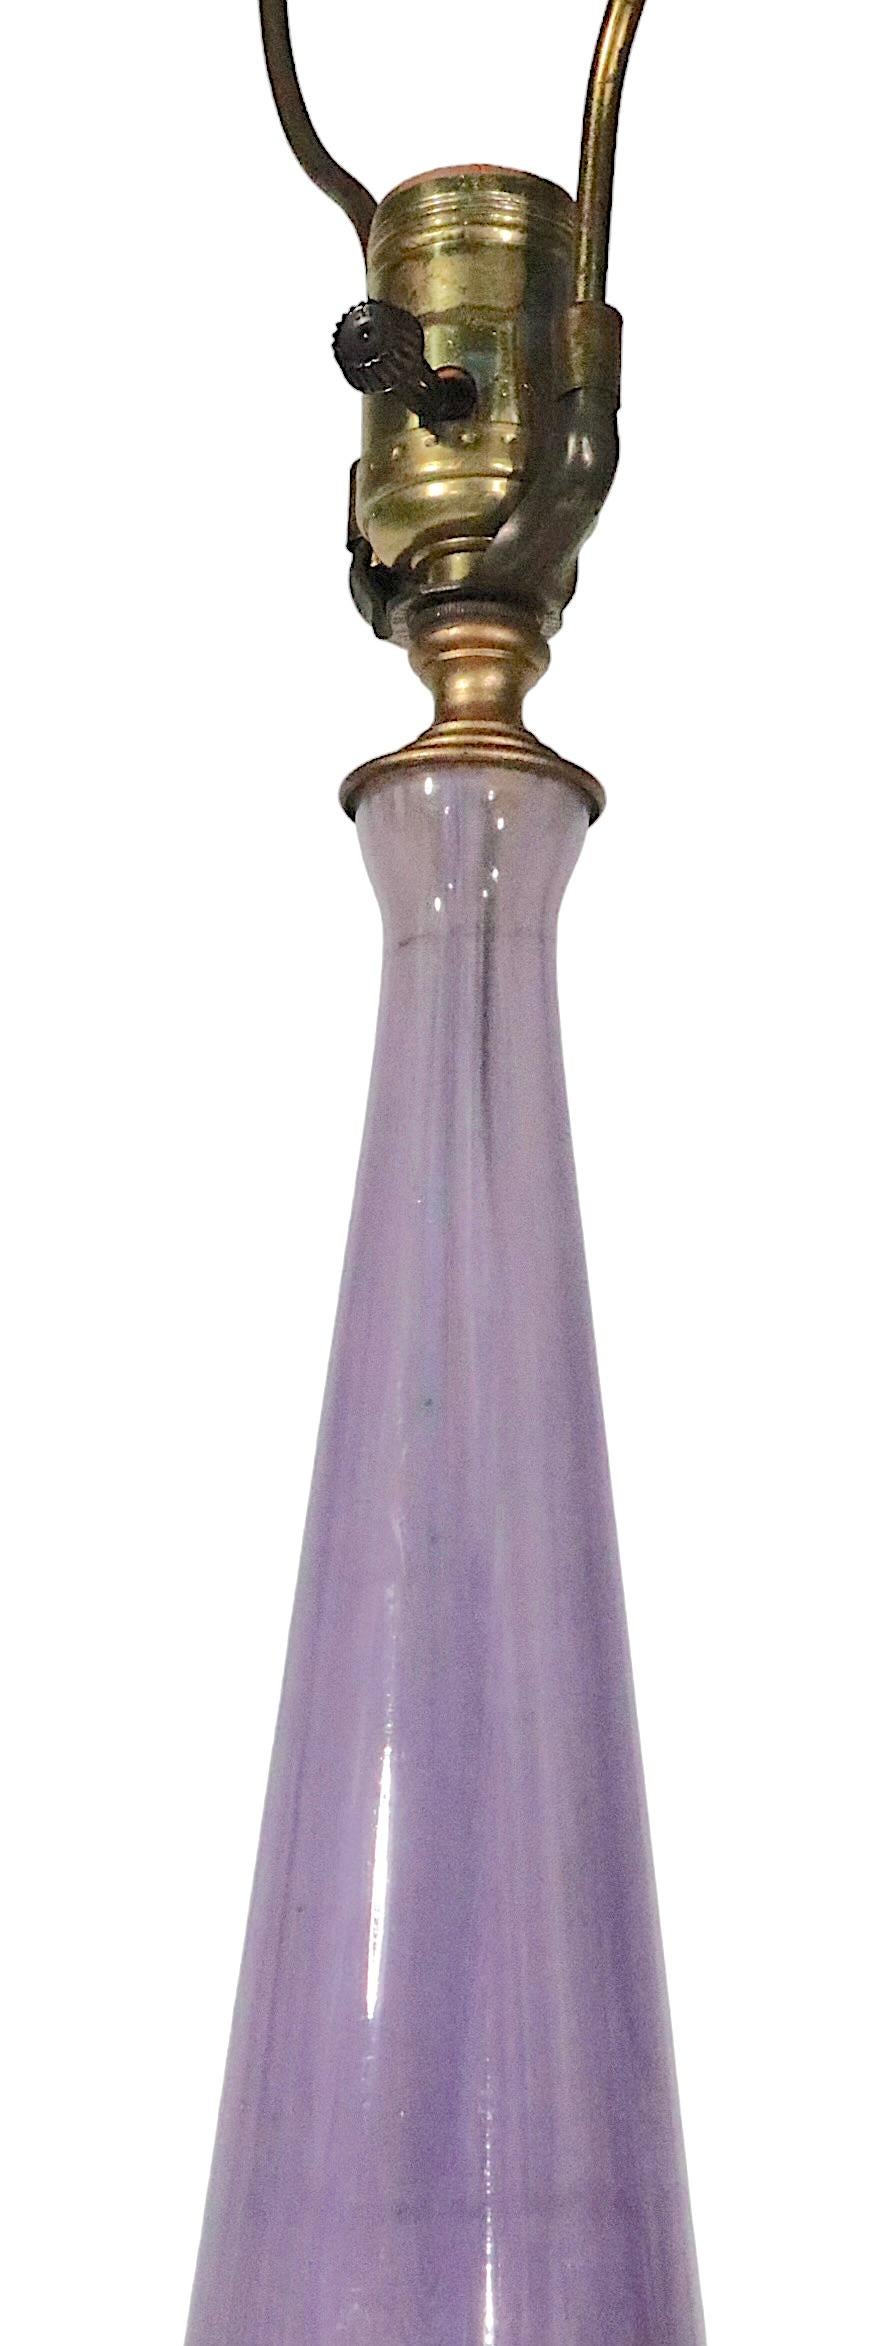 Large Murano Glass Table Lamp in Lavender Glass, circa 1950/1960s For Sale 5